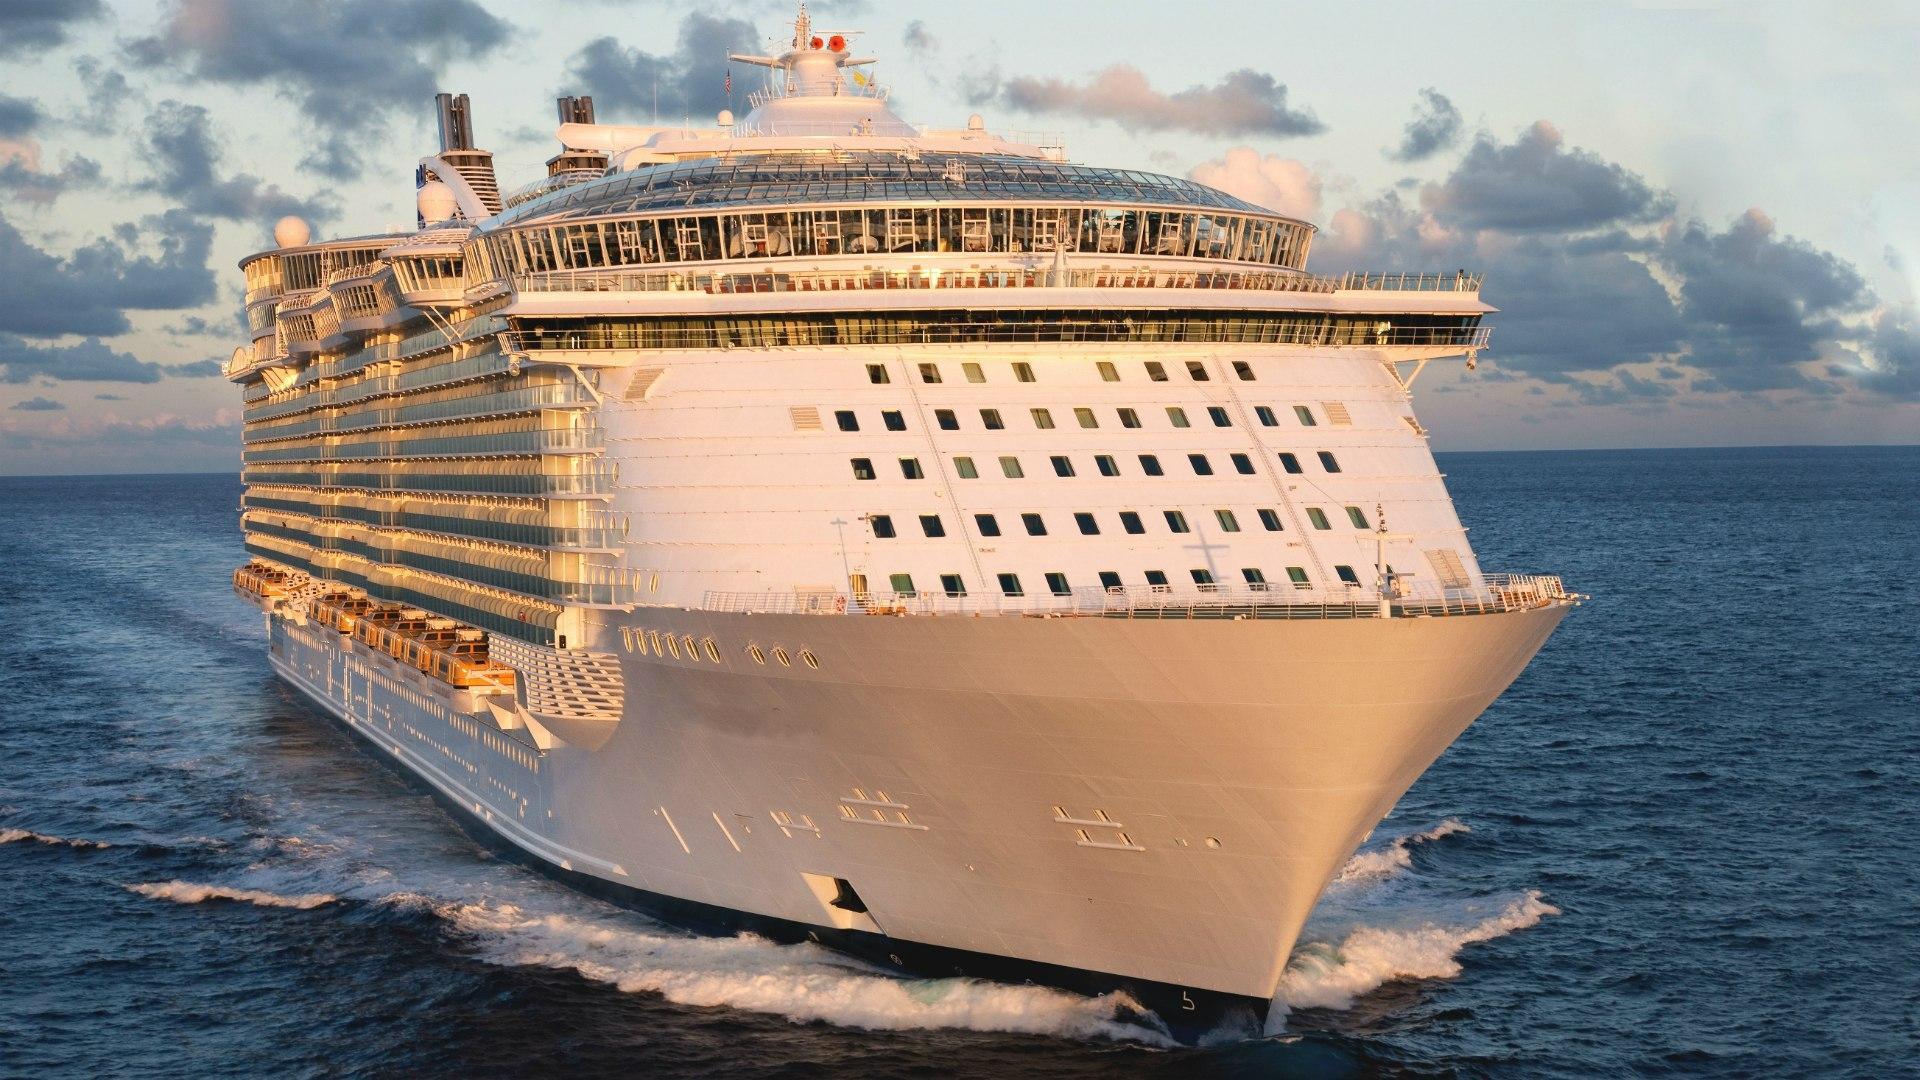 Big cruise ships. Wallpapers for Android